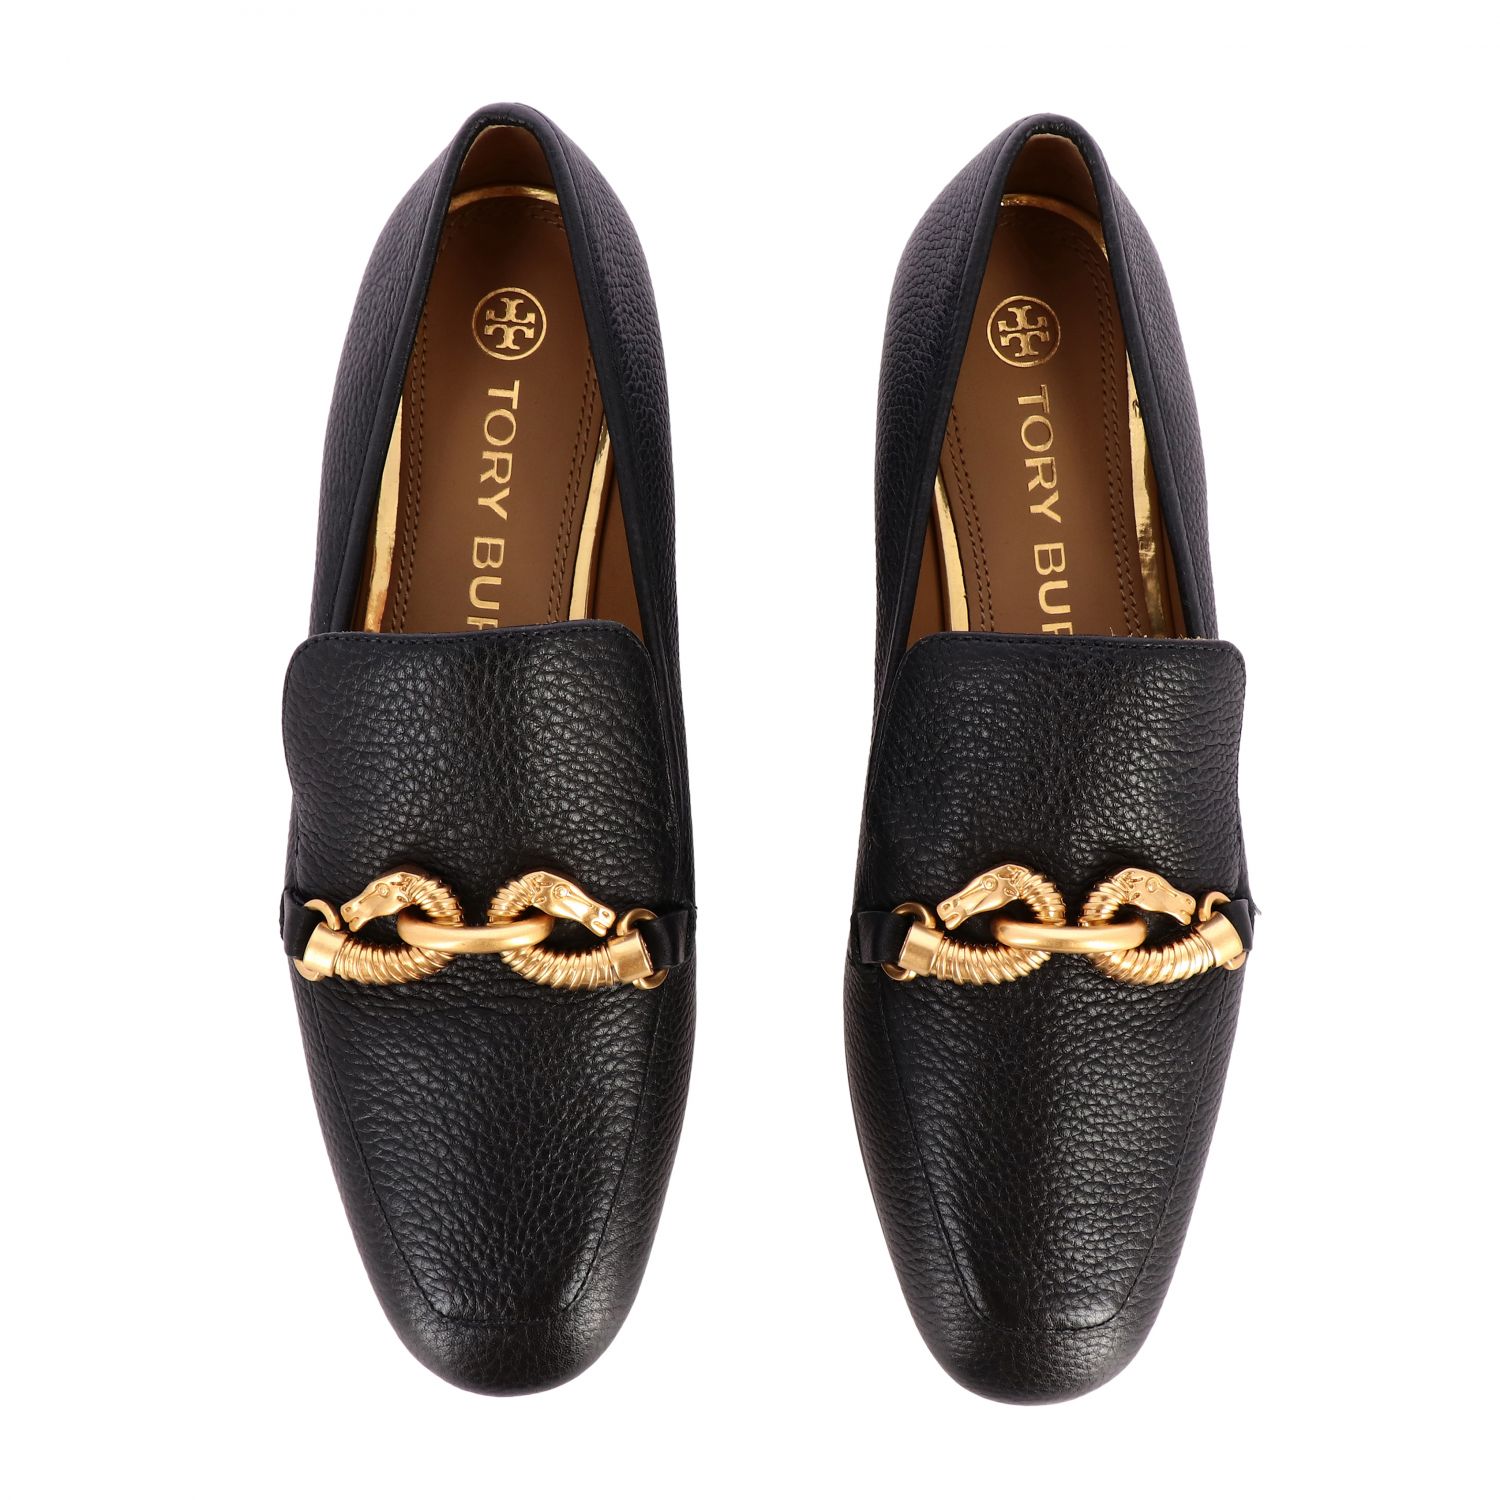 TORY BURCH: Jessa loafer in hammered leather with horsebit | Loafers ...